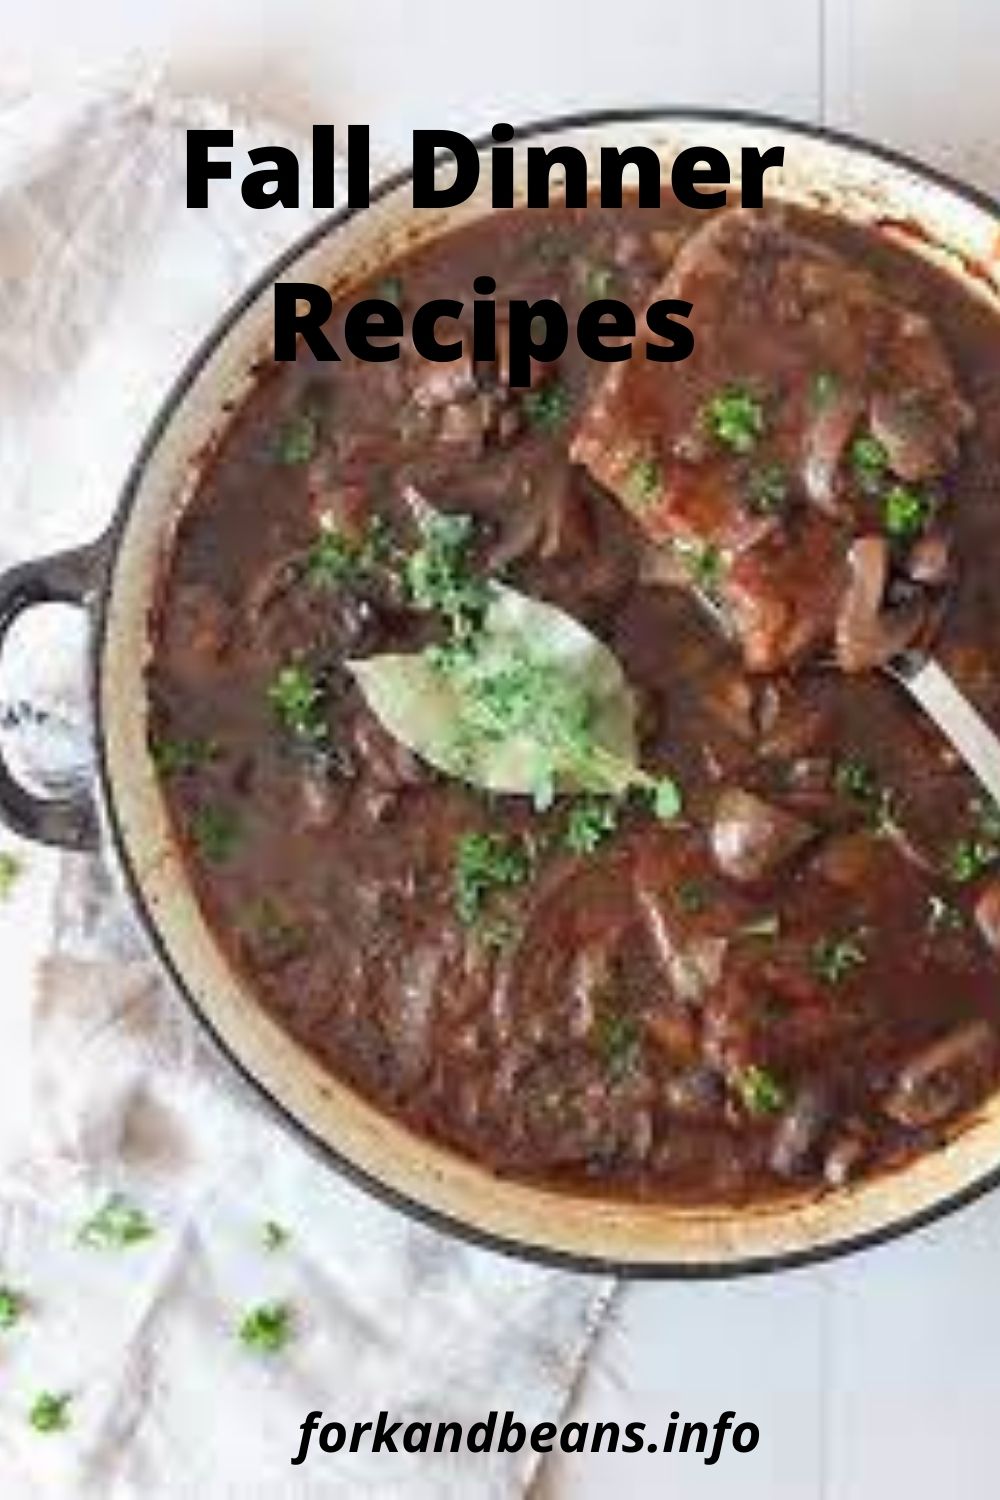 BRAISED BEEF IN RED WINE: A ST. CLAIR (V) RECIPE